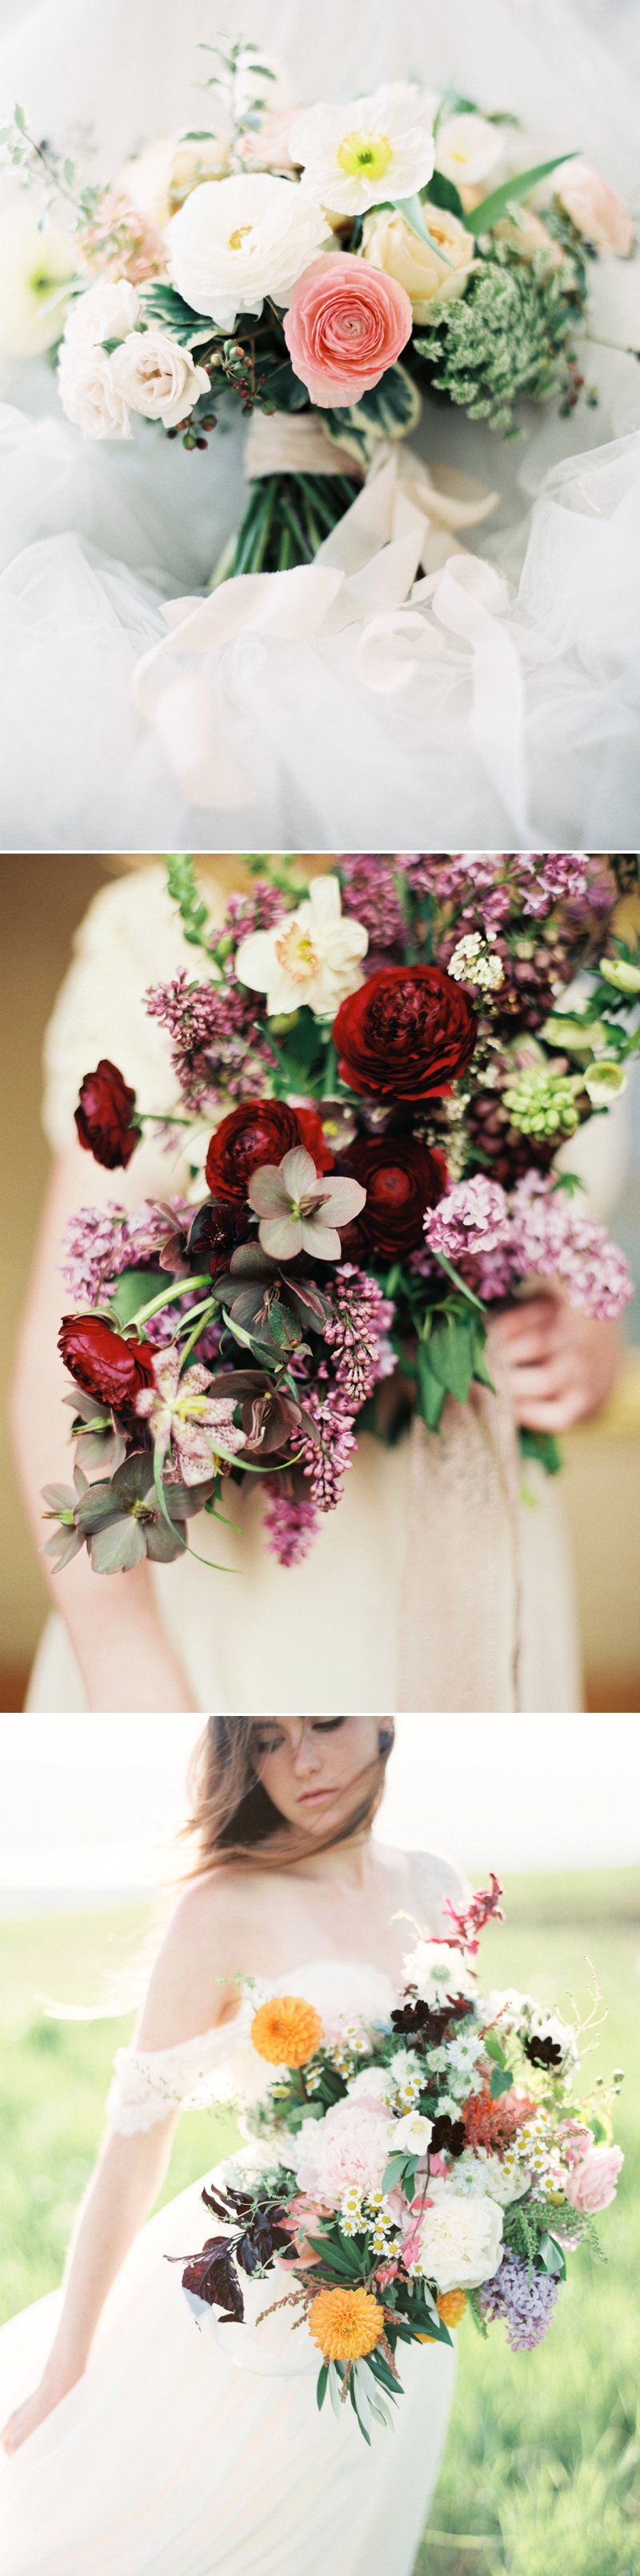 3 Bouquets for Spring Weddings by Orange Photograpie